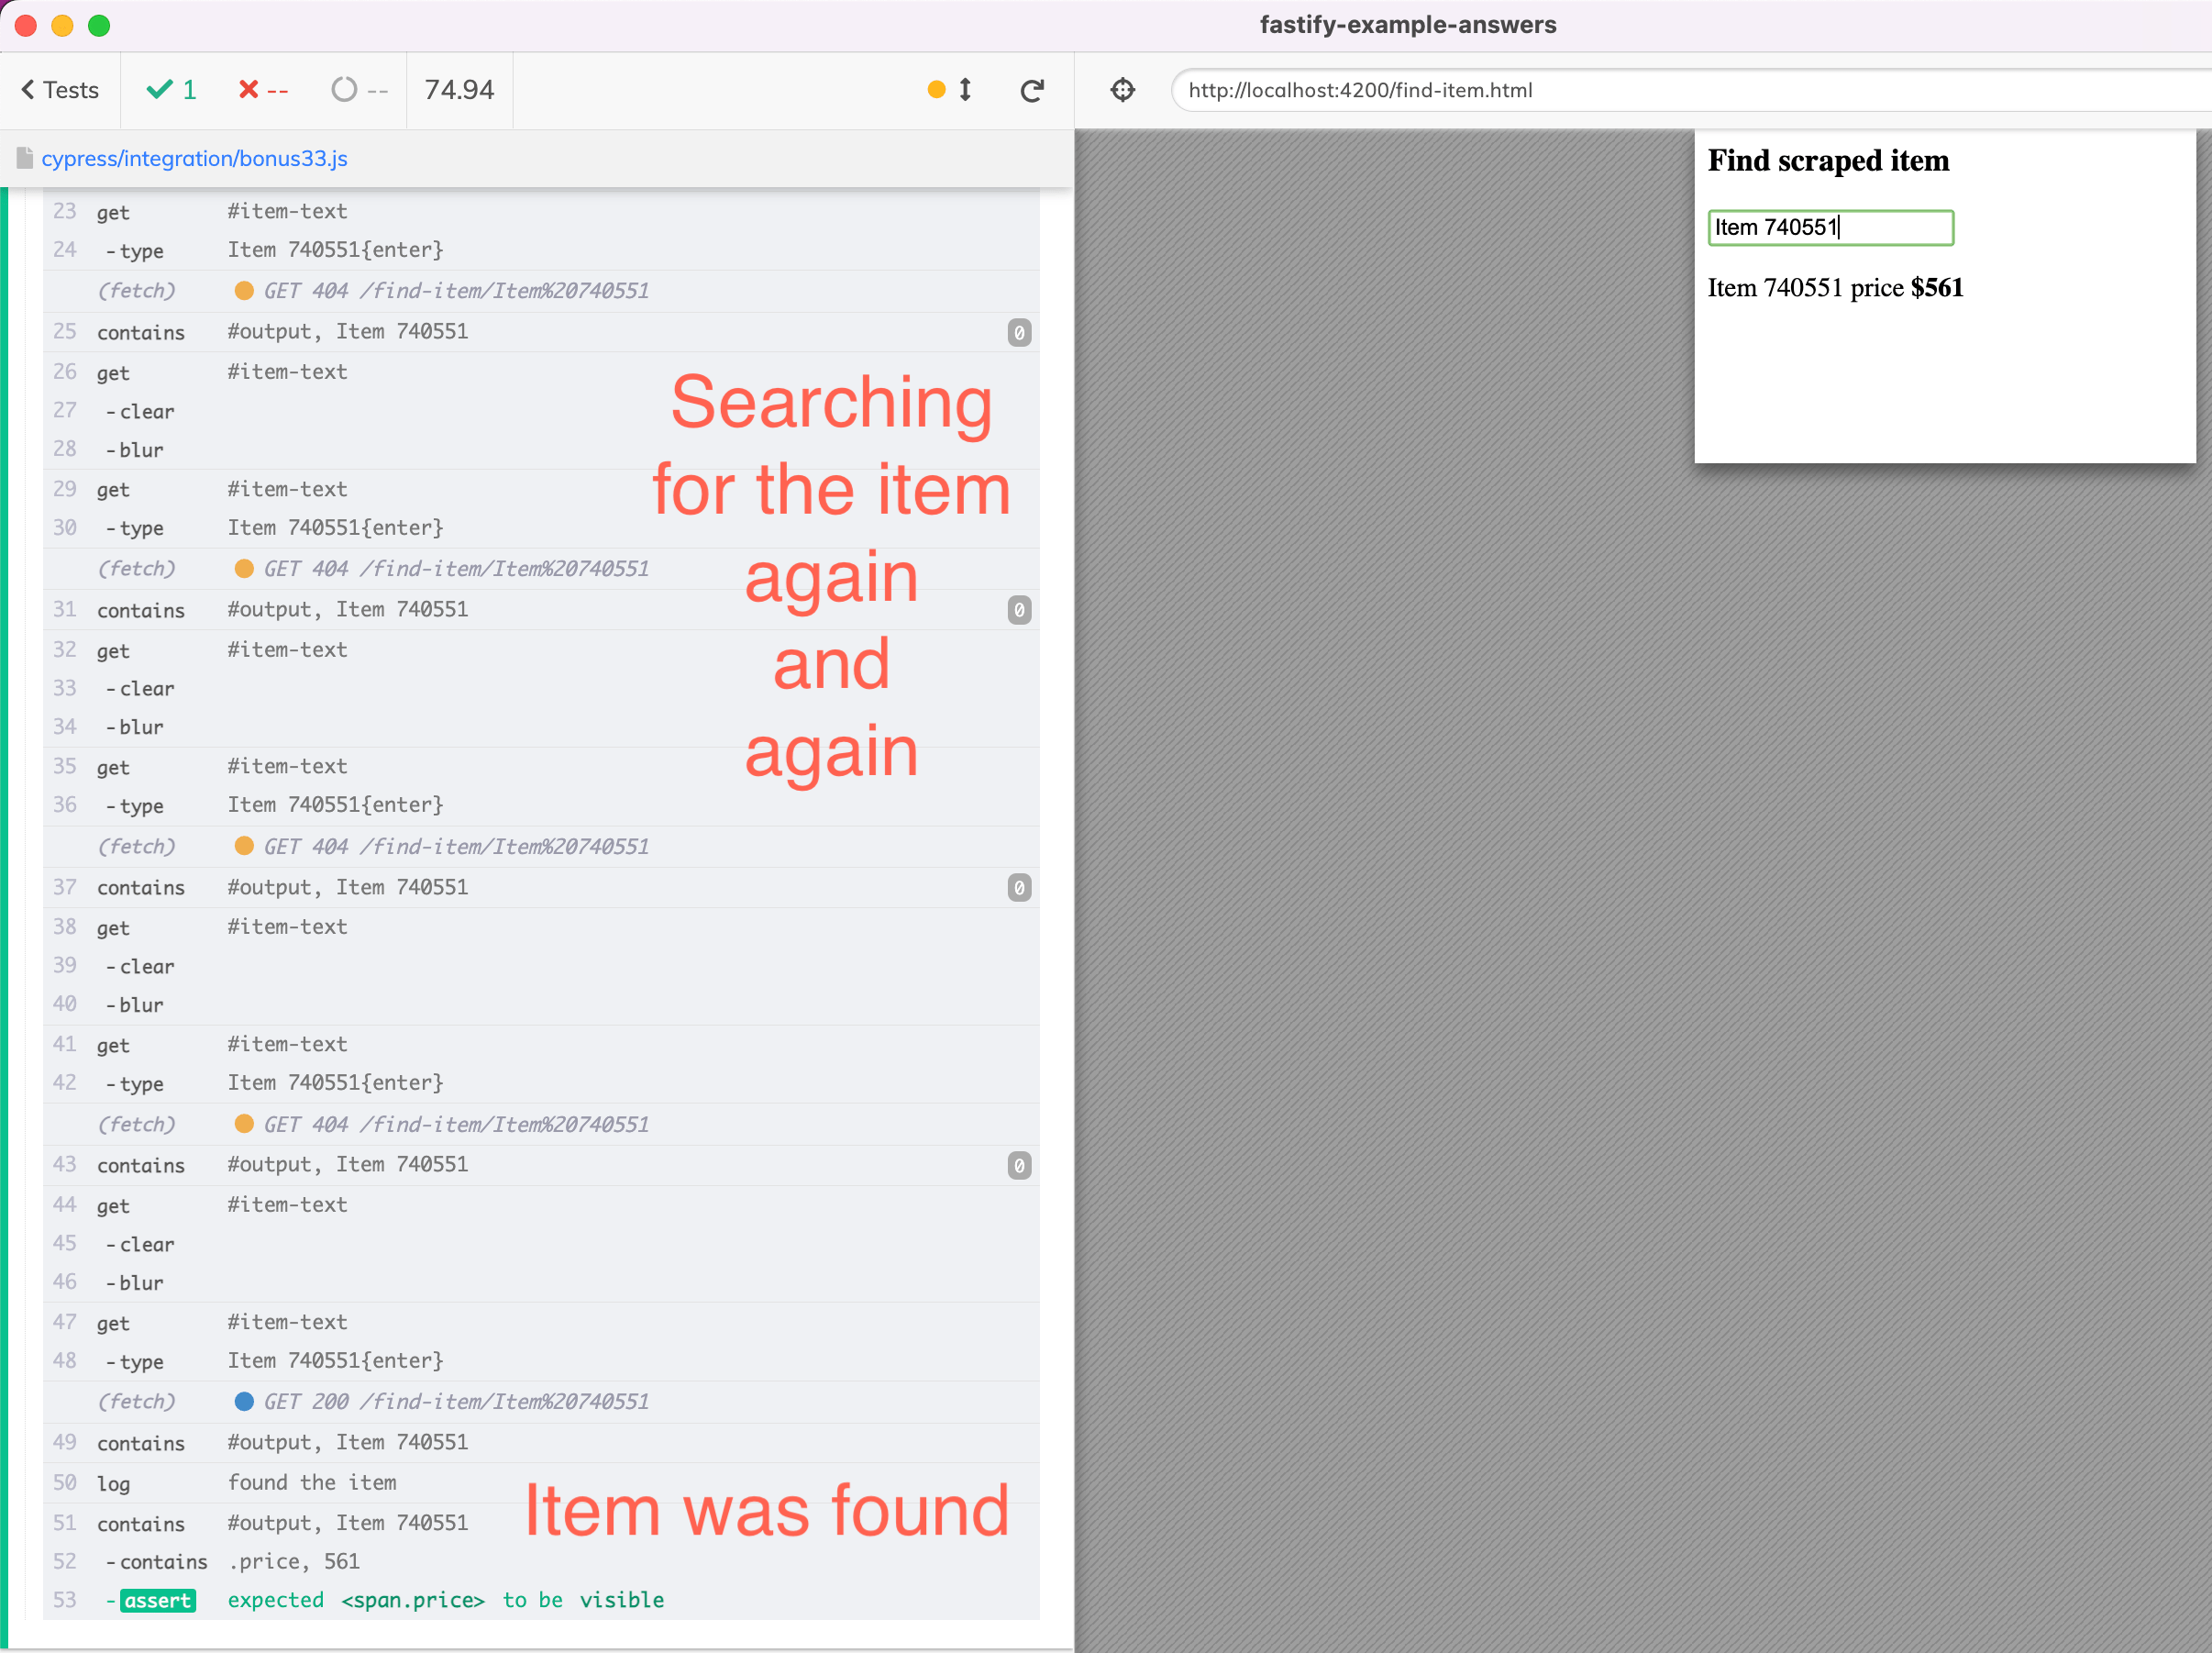 The test retried the item search until it found the new item